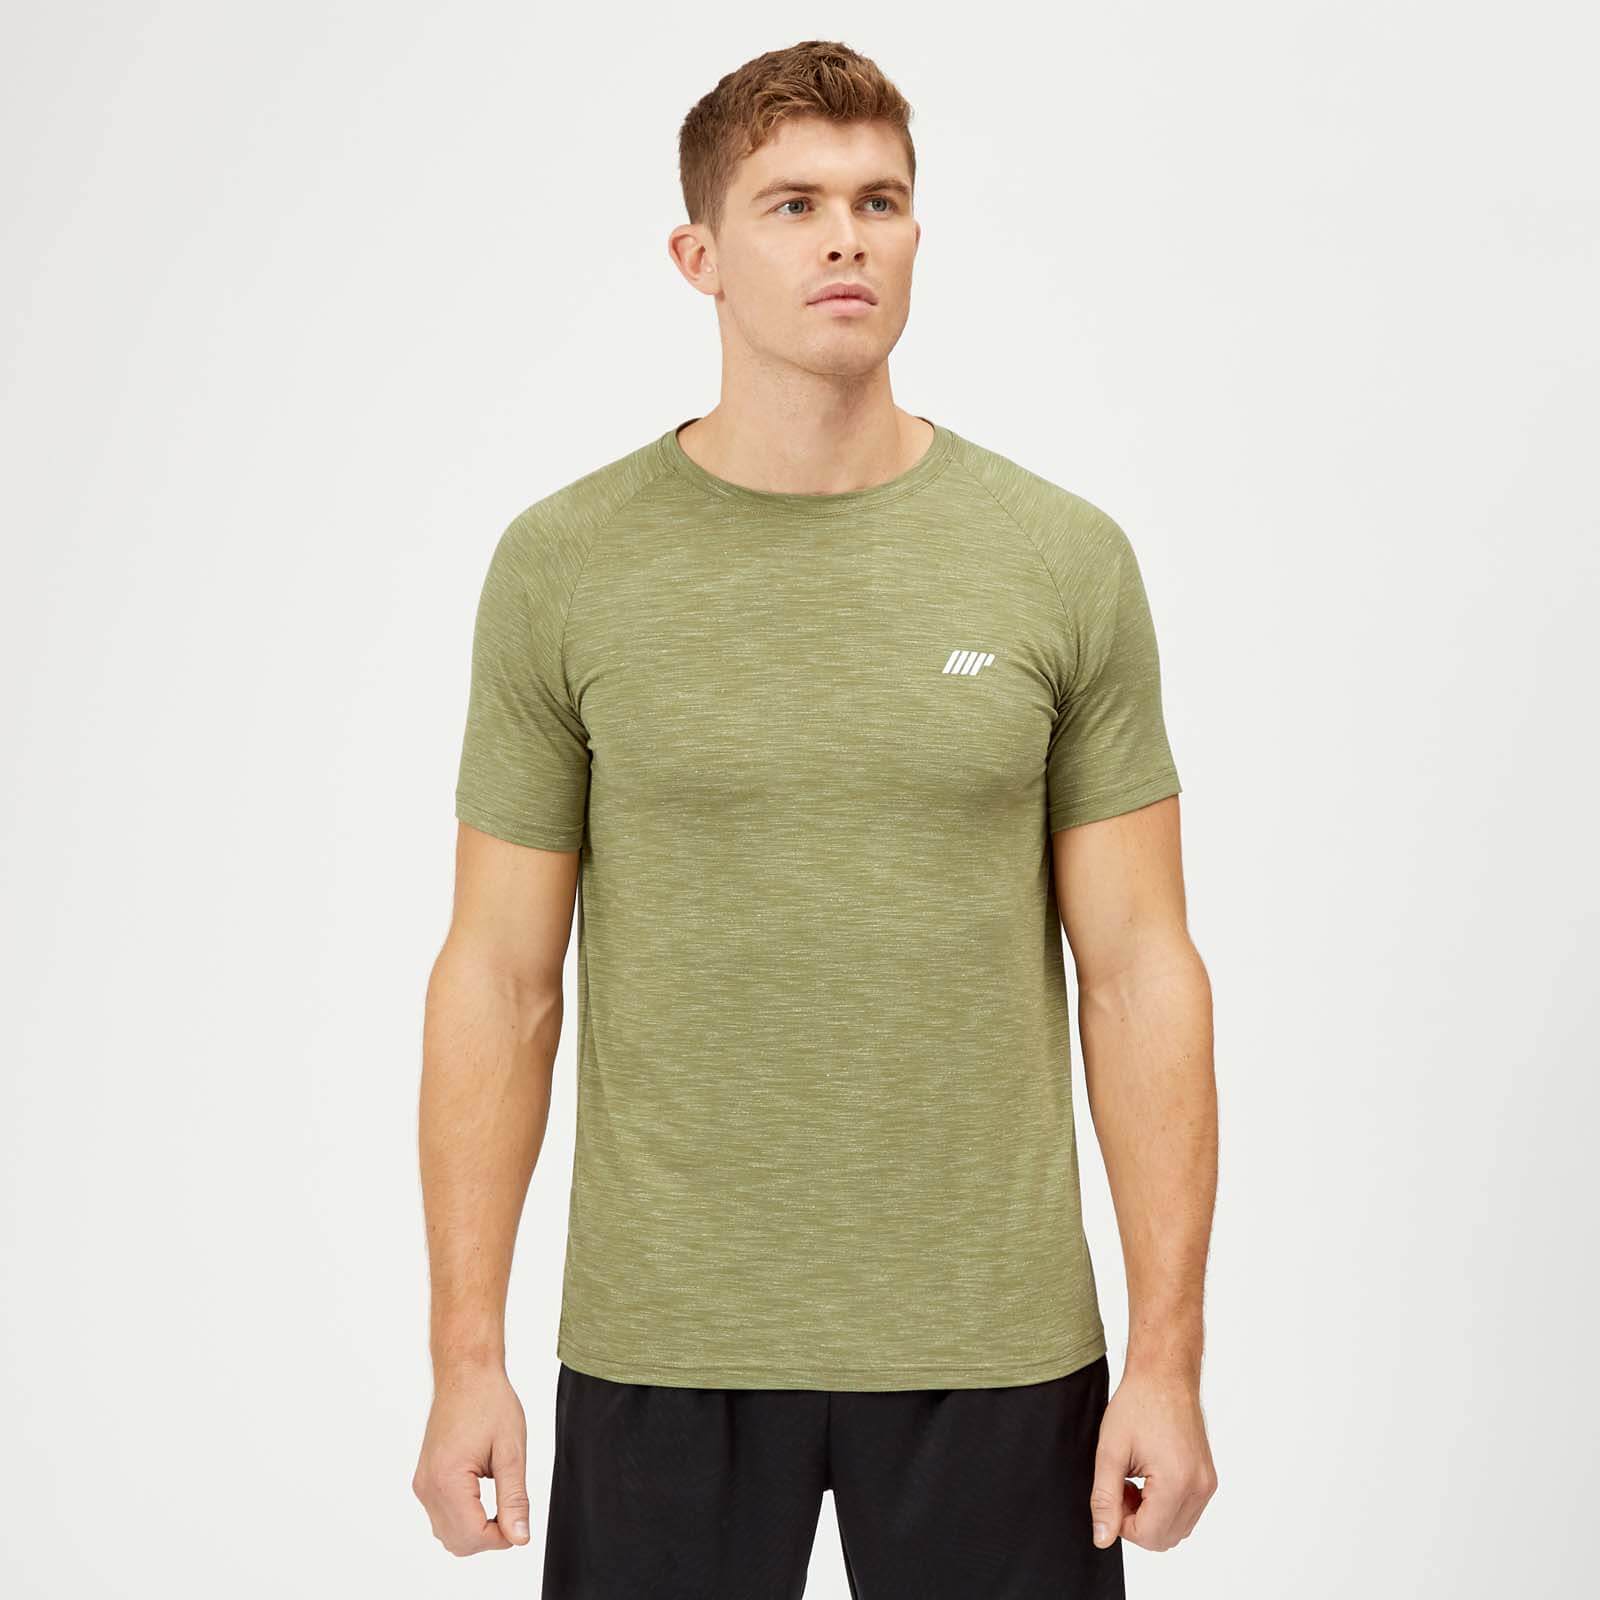 Limited Edition Performance T-Shirt - Light Olive - M